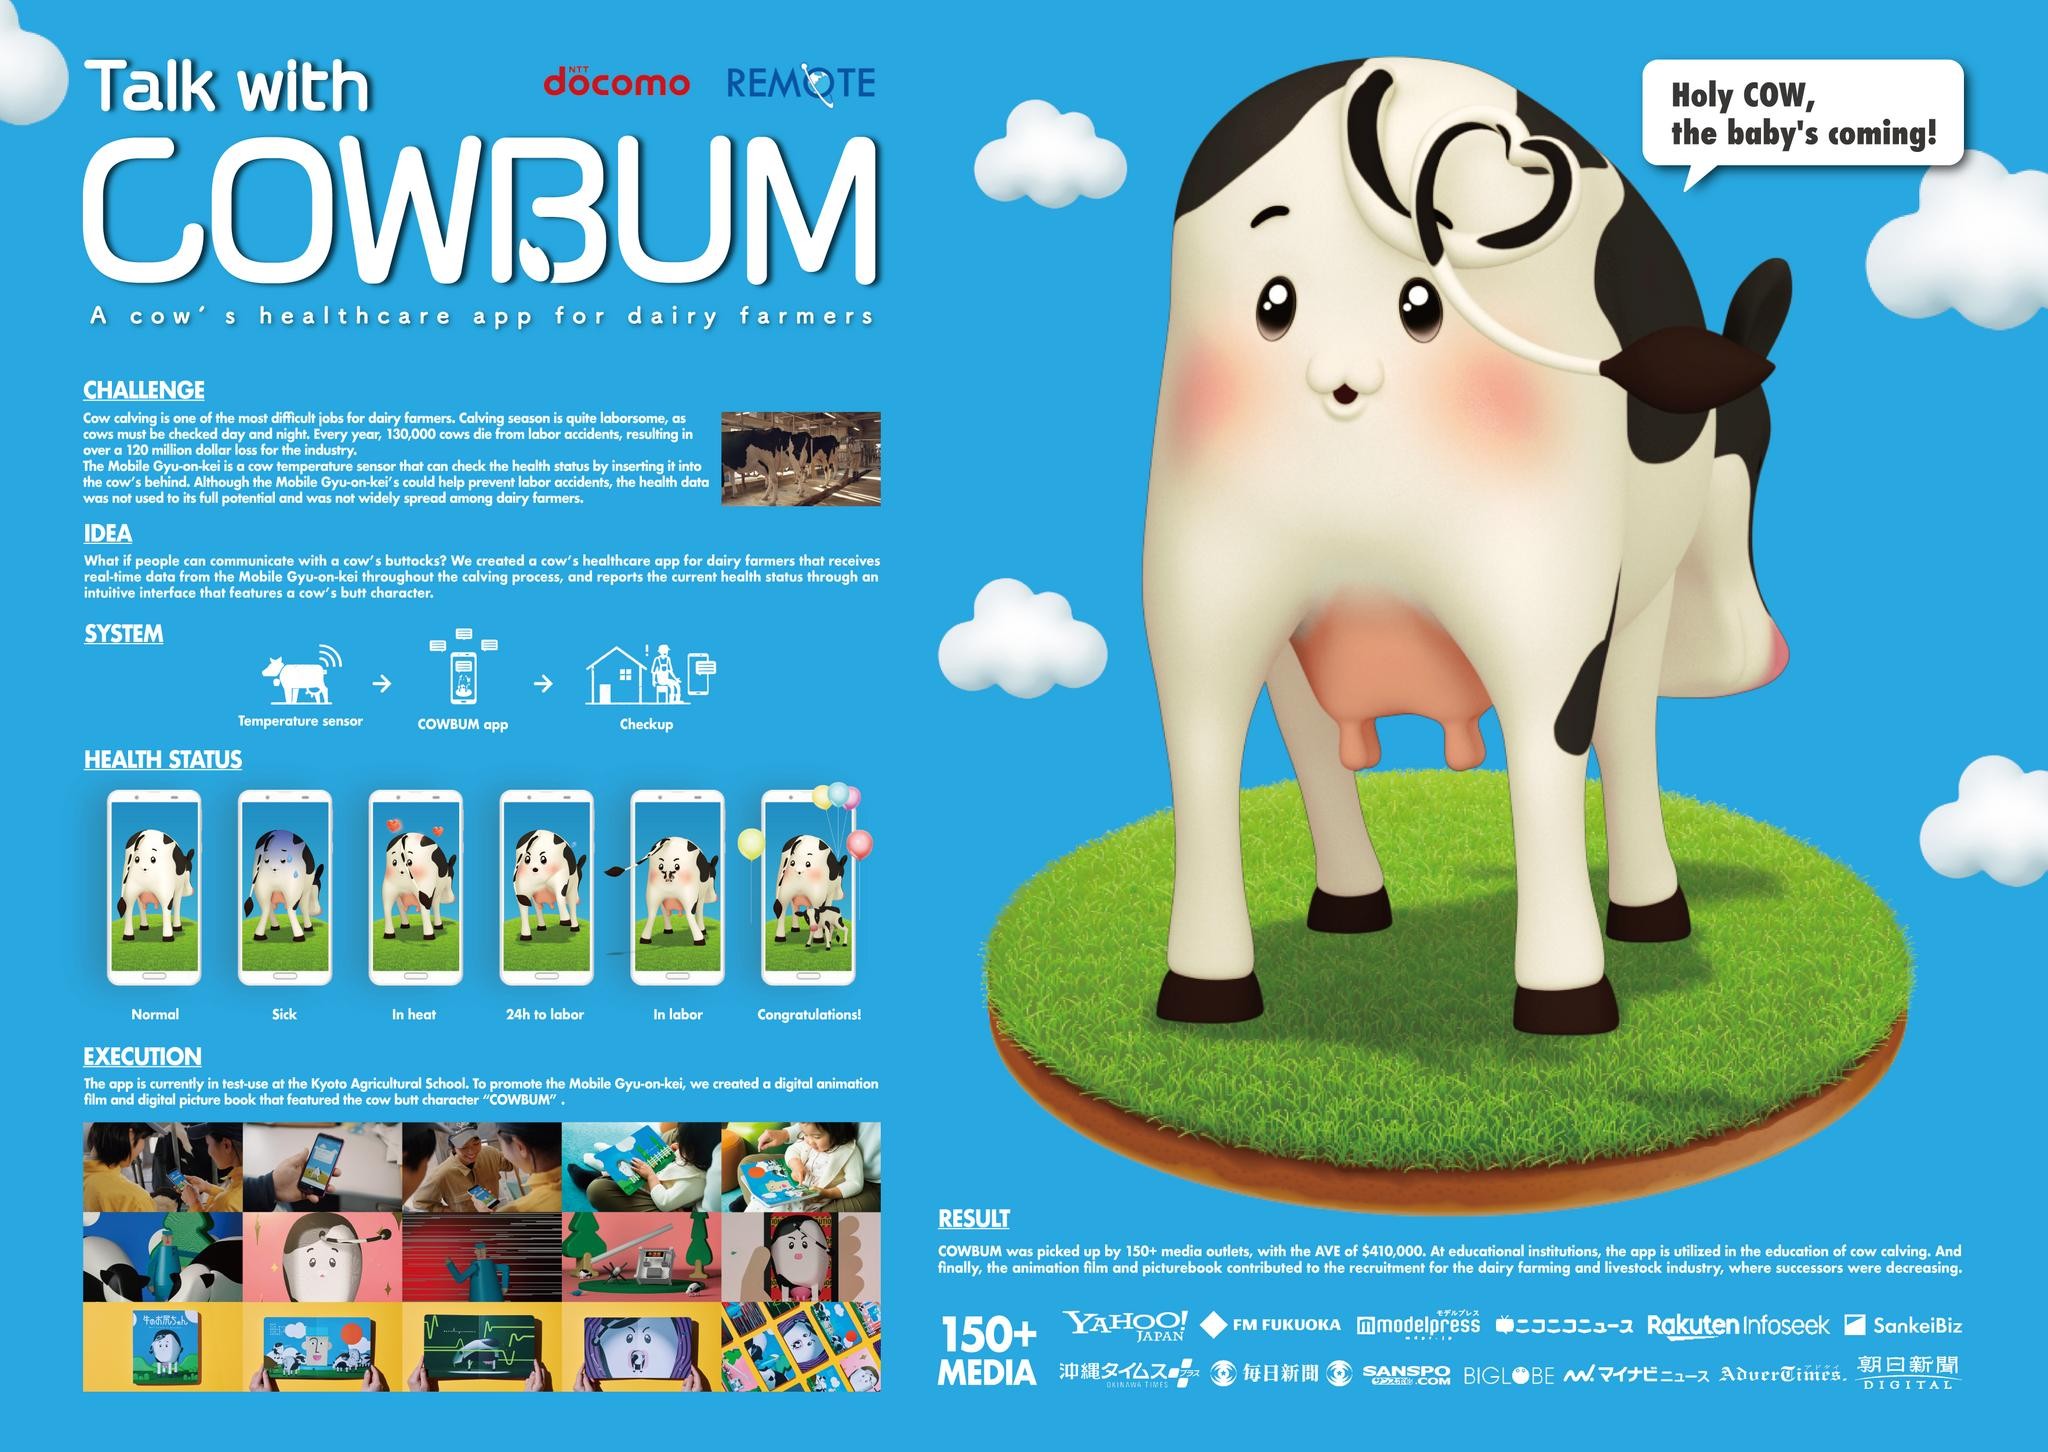 Talk with Cowbum